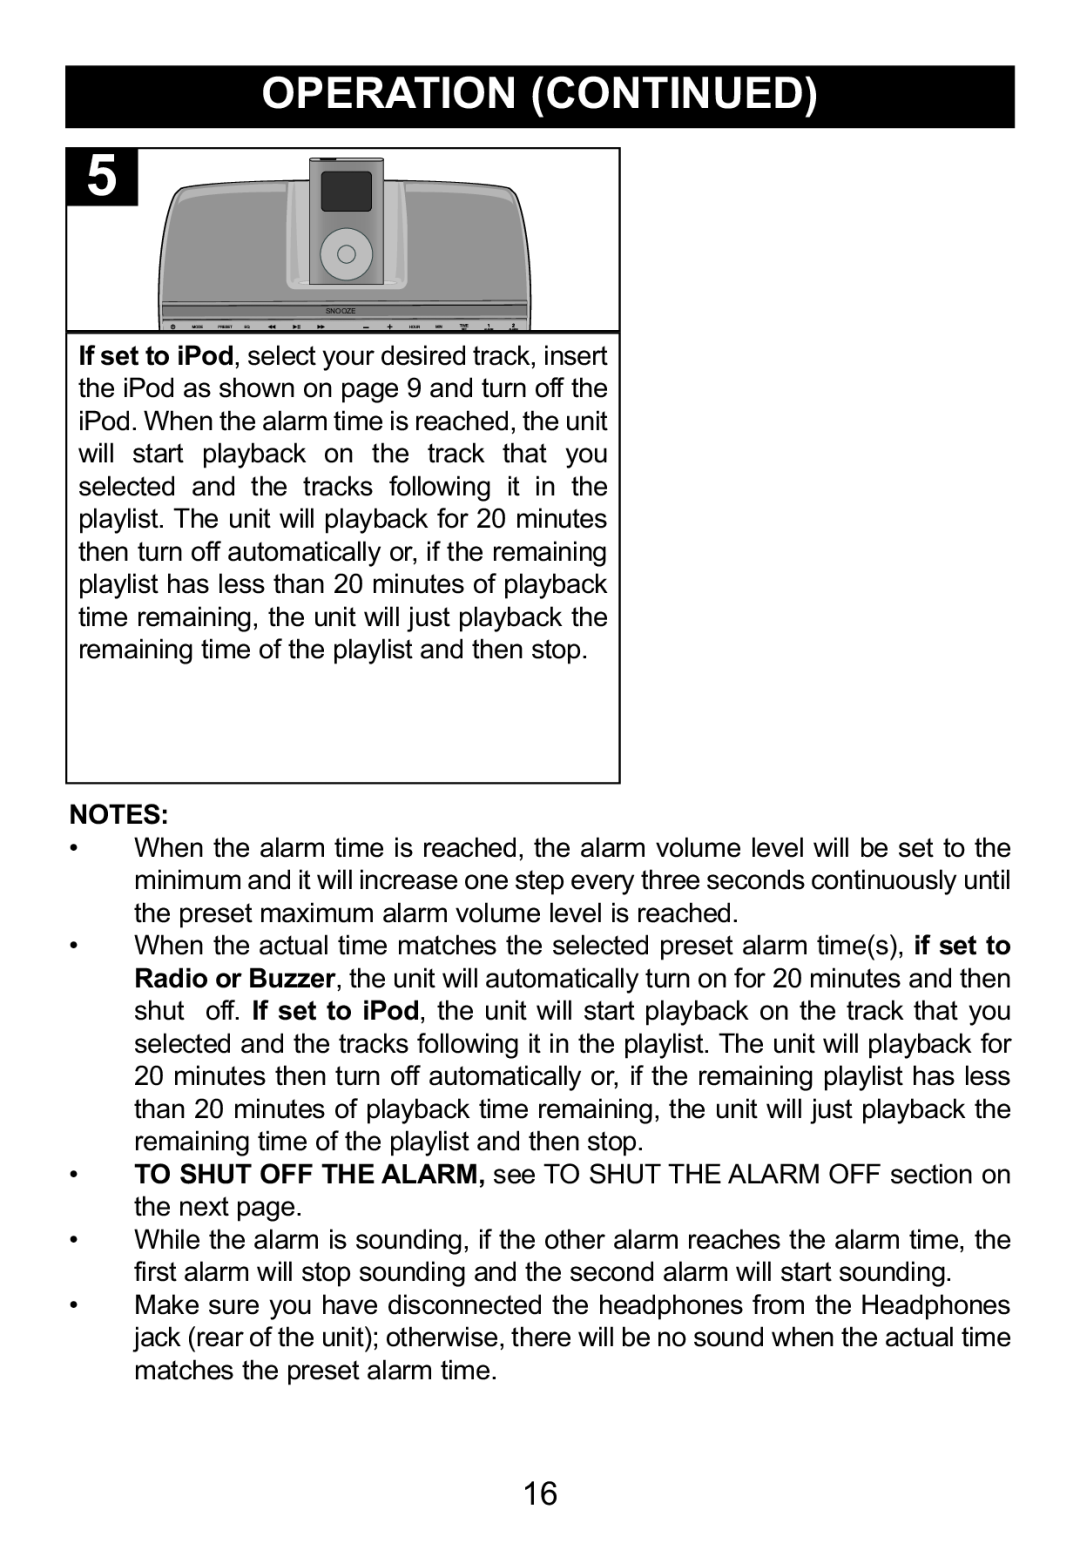 Memorex Mi4014 manual TO SHUT OFF THE ALARM, see TO SHUT THE ALARM OFF section on the next page 